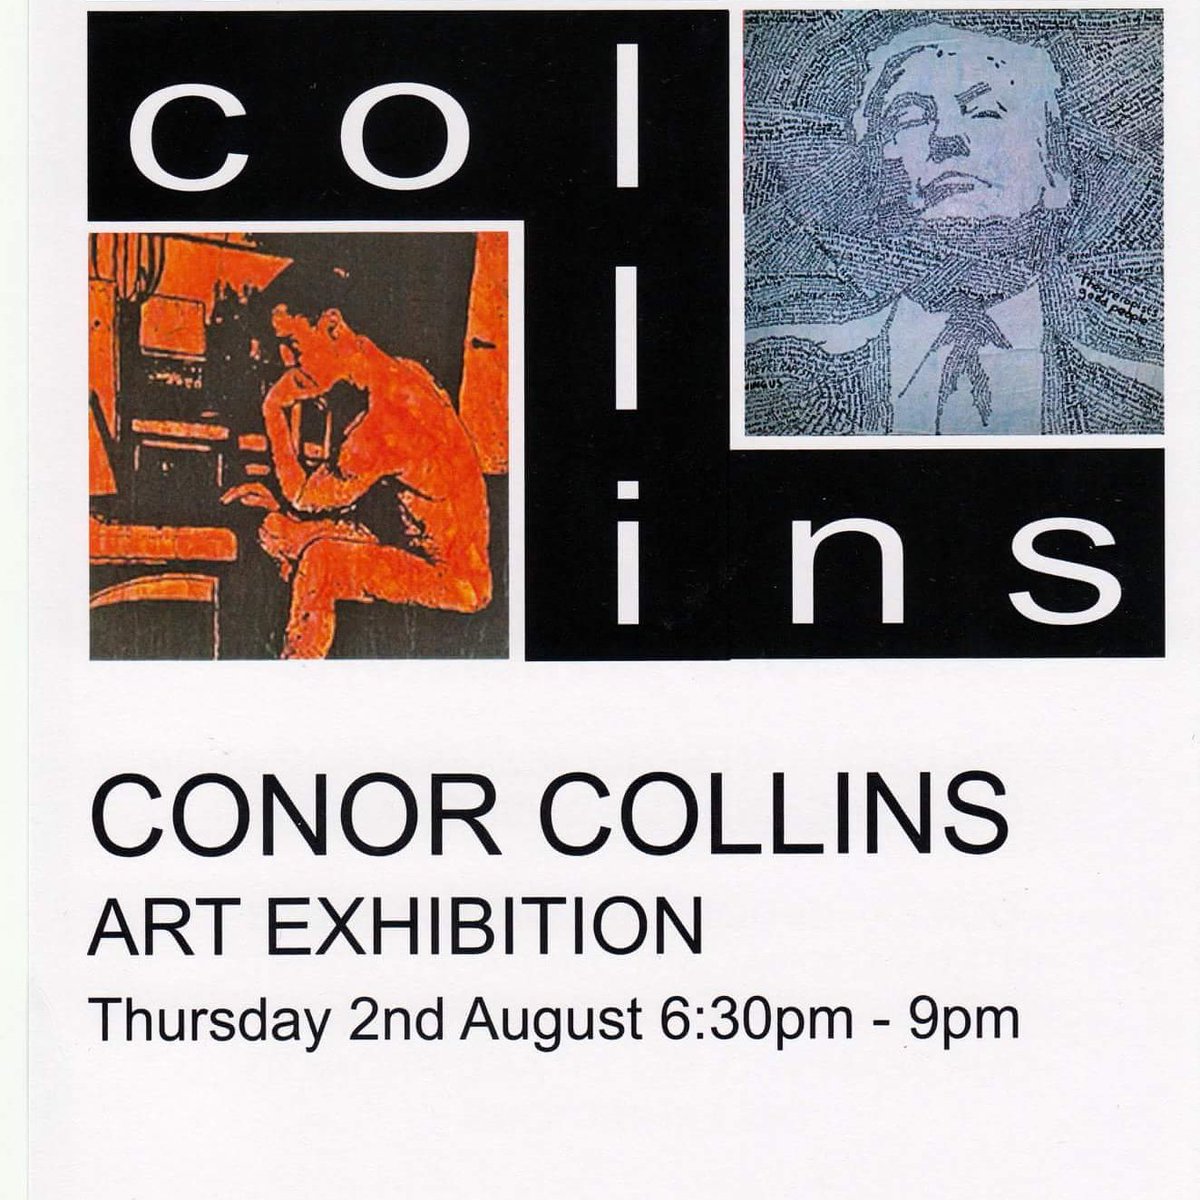 This must see exhibition starts today at 6.30pm. Come and meet Conor over a glass of fizz. Grab a bargain before he becomes world famous! #manchesterartist #ConorCollins #artist #PopArt #HappeningNow #buysomeart